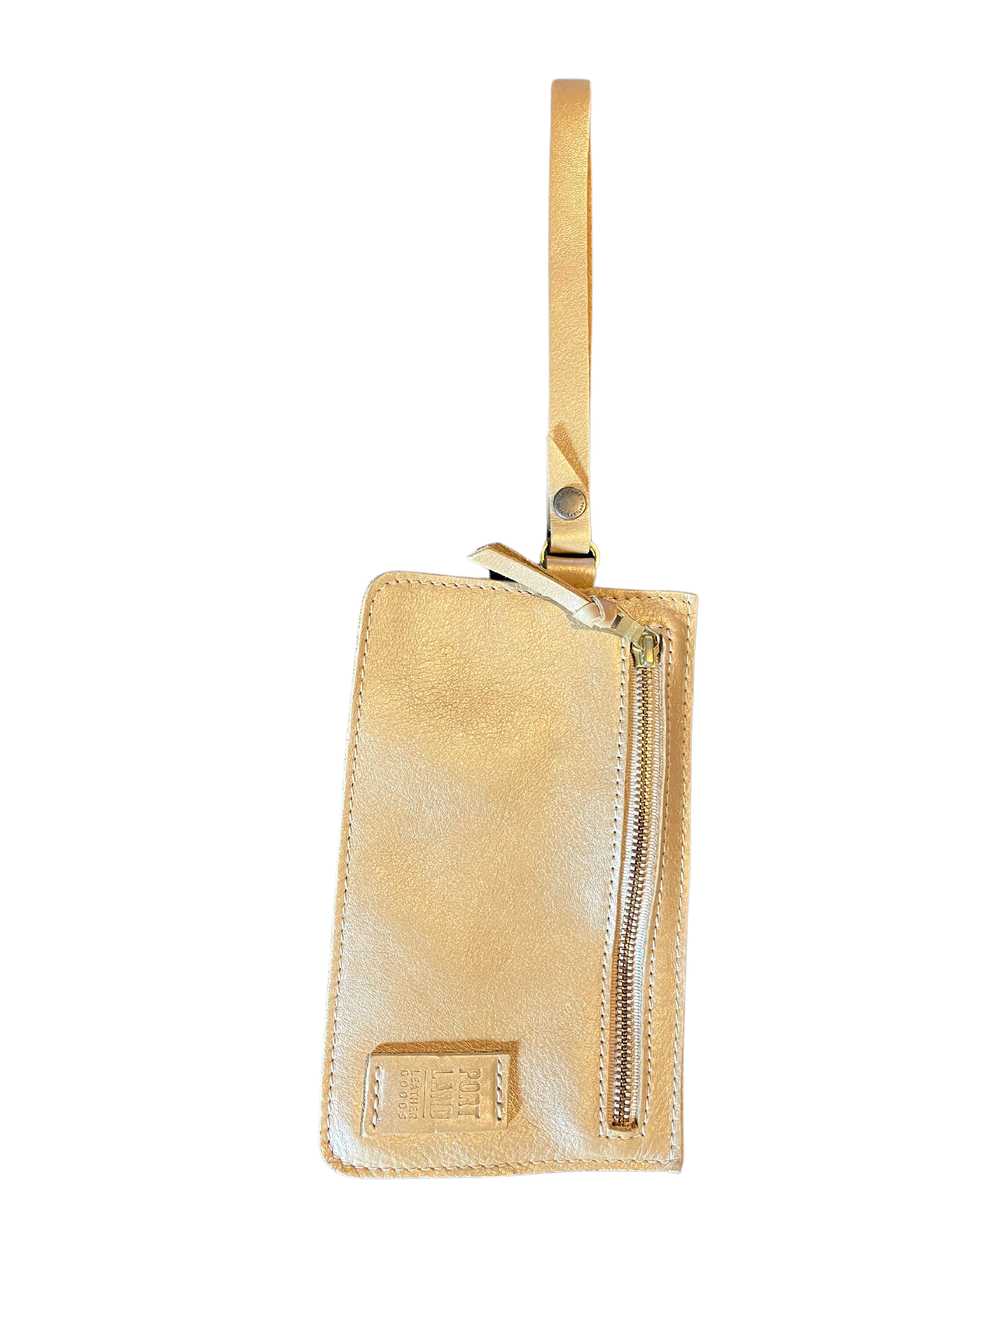 Portland Leather 'Almost Perfect' Adriana Pouch - image 4